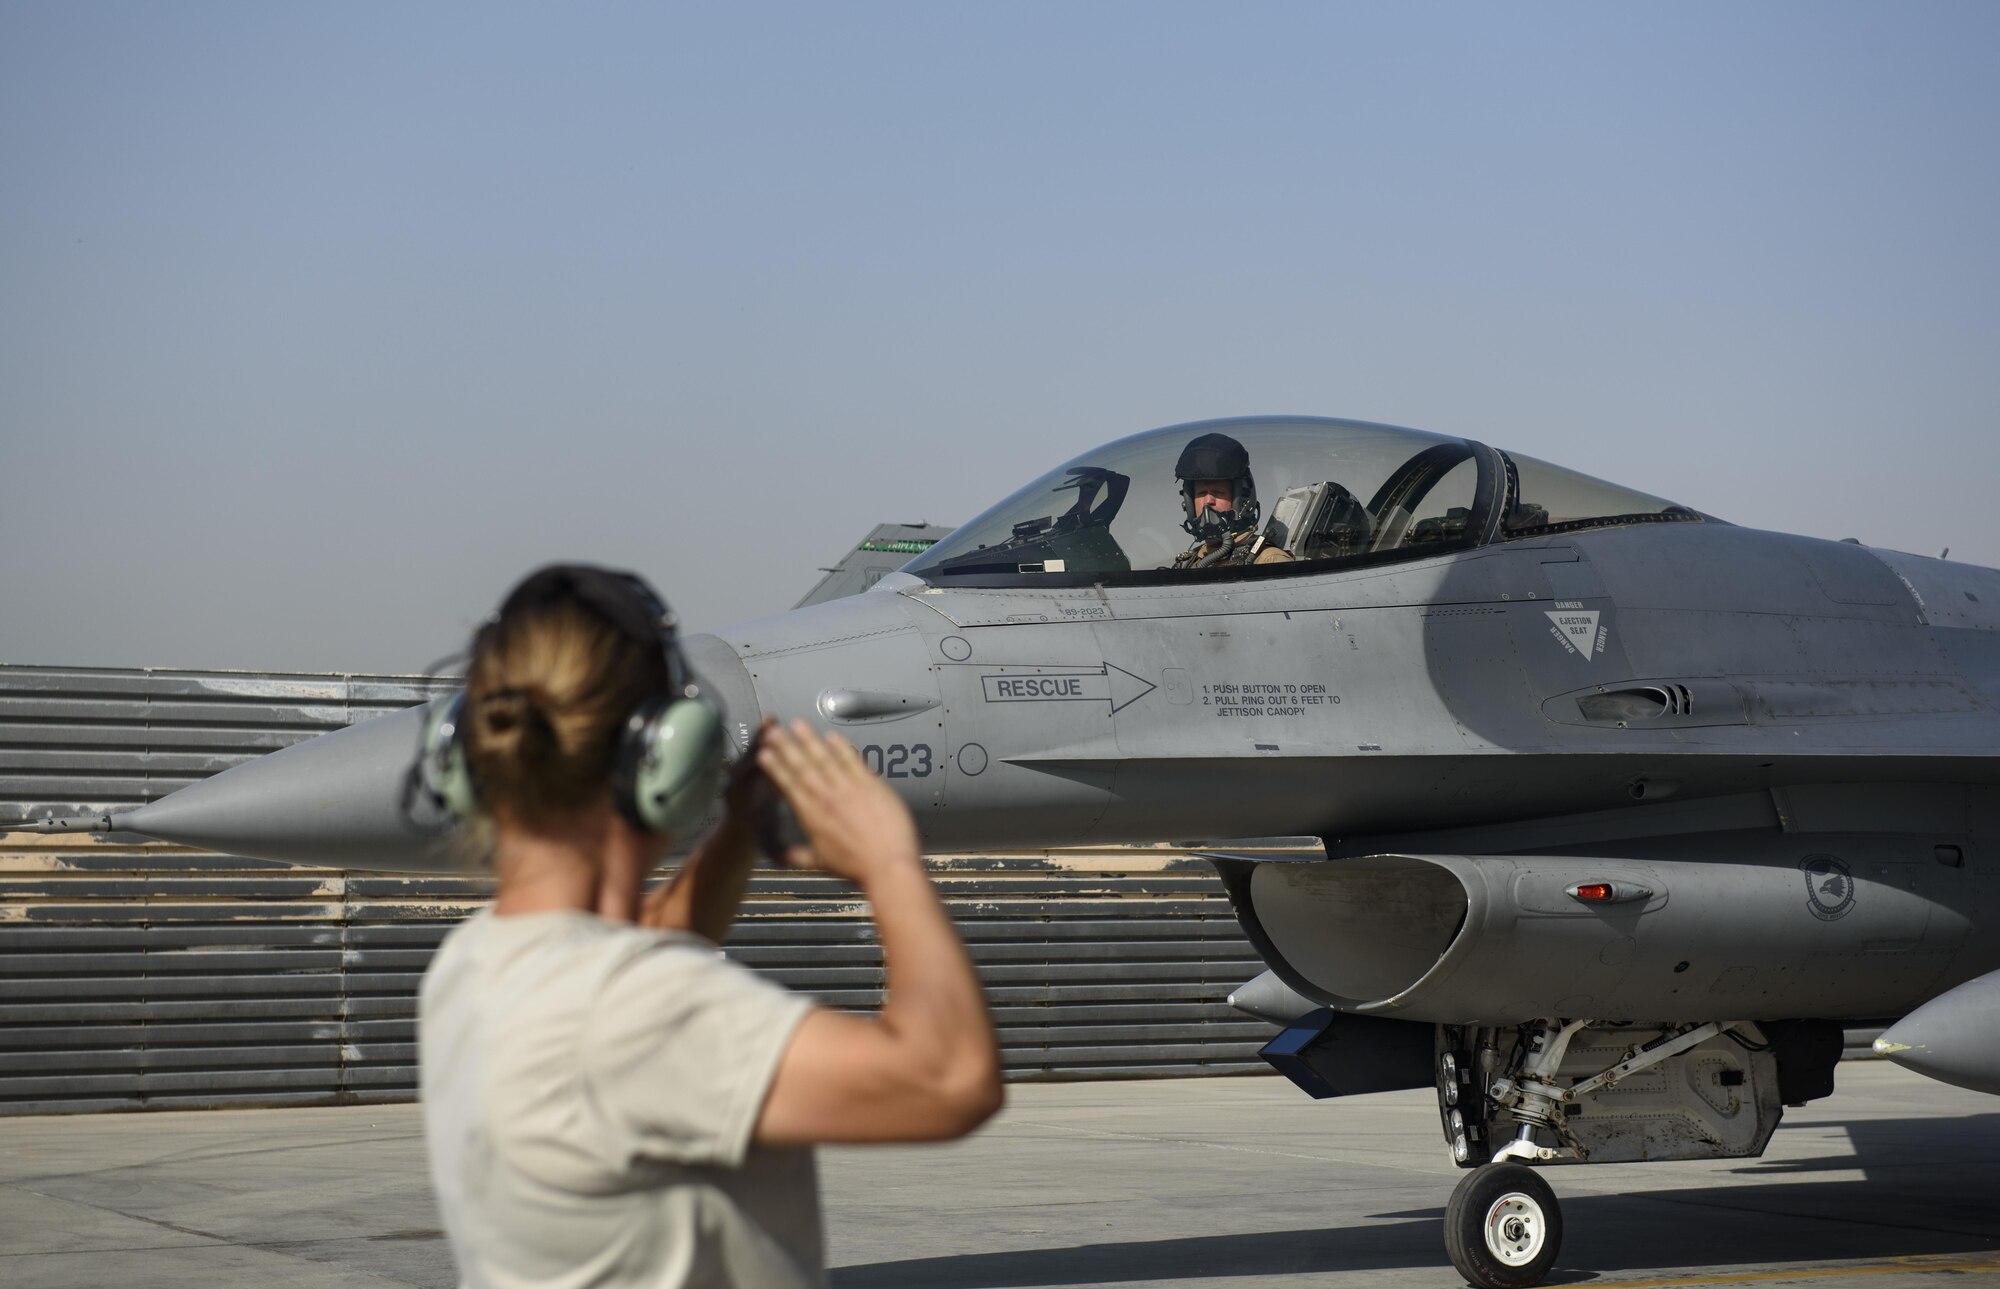 Senior Airman Heather Deines, 455th Expeditionary Aircraft Maintenance Squadron, marshals an F-16 Fighting Falcon, piloted by Brig. Gen. Jim Sears, at Bagram Airfield, Afghanistan, May 22, 2017. Sears, commander of the 455th Air Expeditionary Wing, conducted his final flight out of Bagram Airfield. (U.S. Air Force photo by Staff Sgt. Benjamin Gonsier)